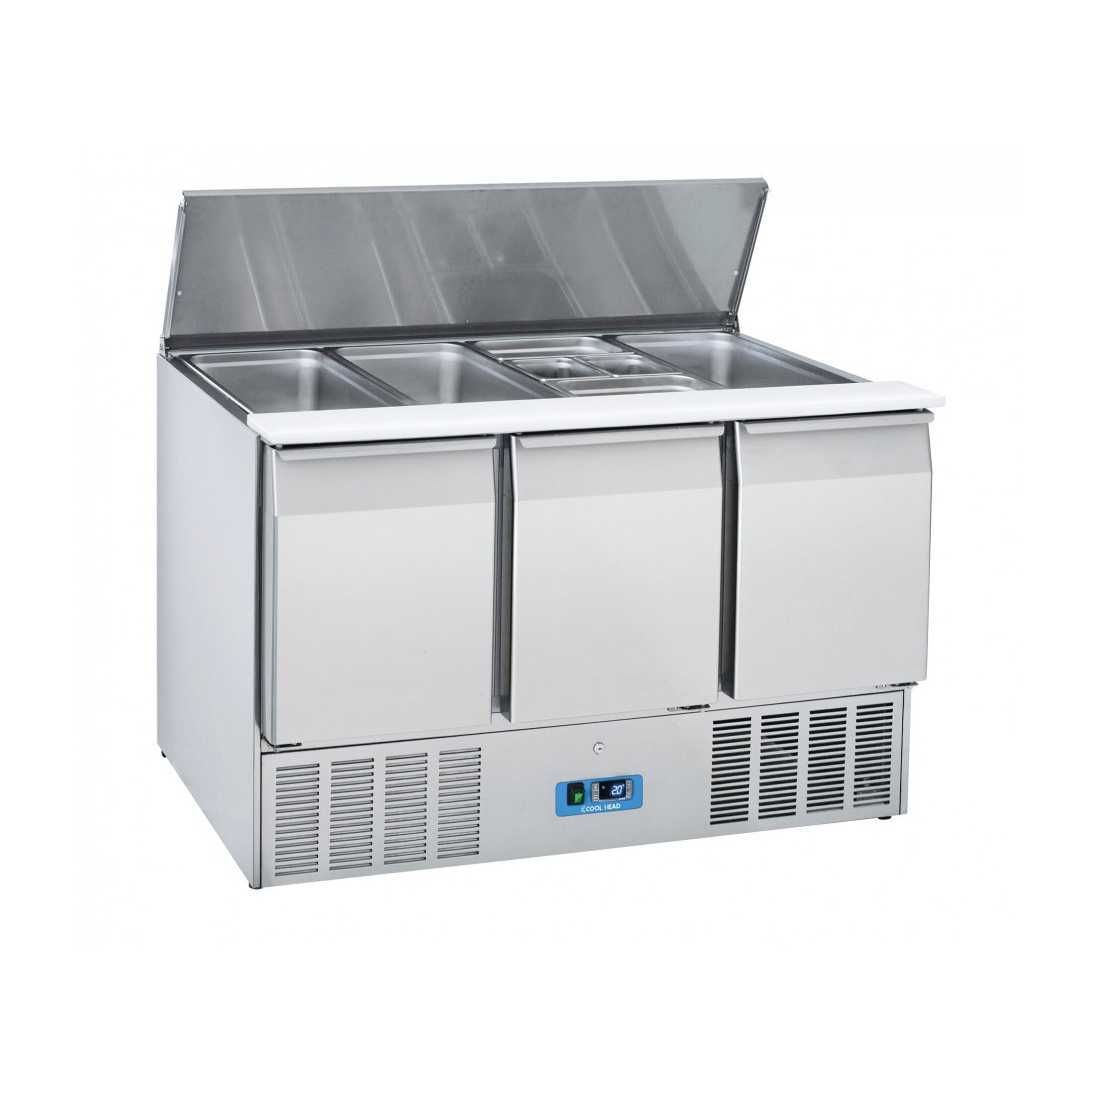 COOL HEAD ,CR93, Sandwich and Salad Prep Refrigerator with Three Doors and Sliding Top Cover